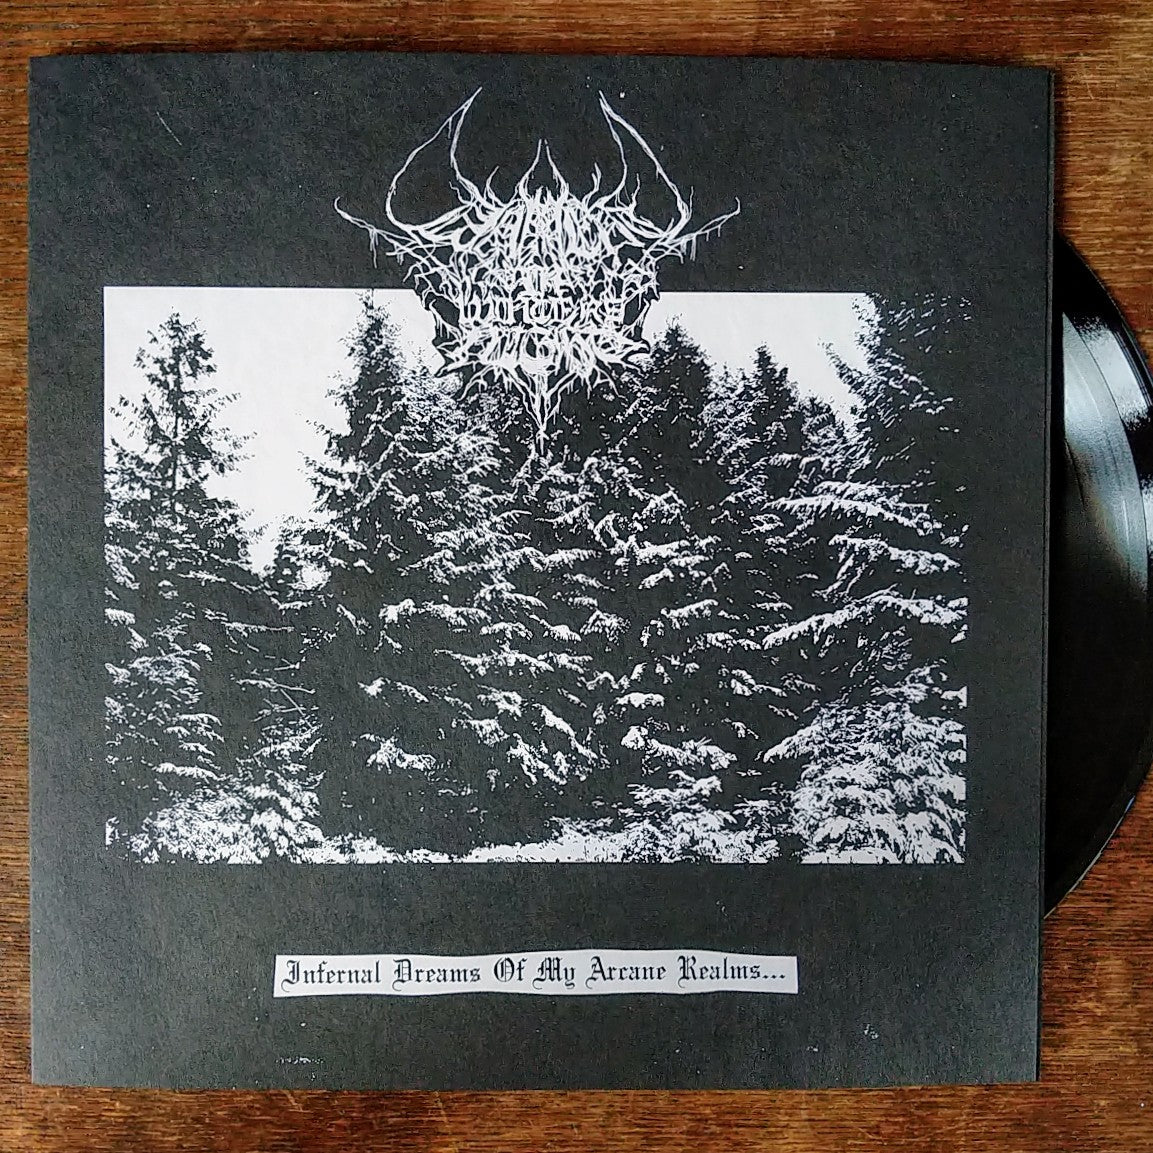 [SOLD OUT] LAMENT IN WINTER'S NIGHT "Infernal Dreams of My Arcane Realms" Vinyl LP